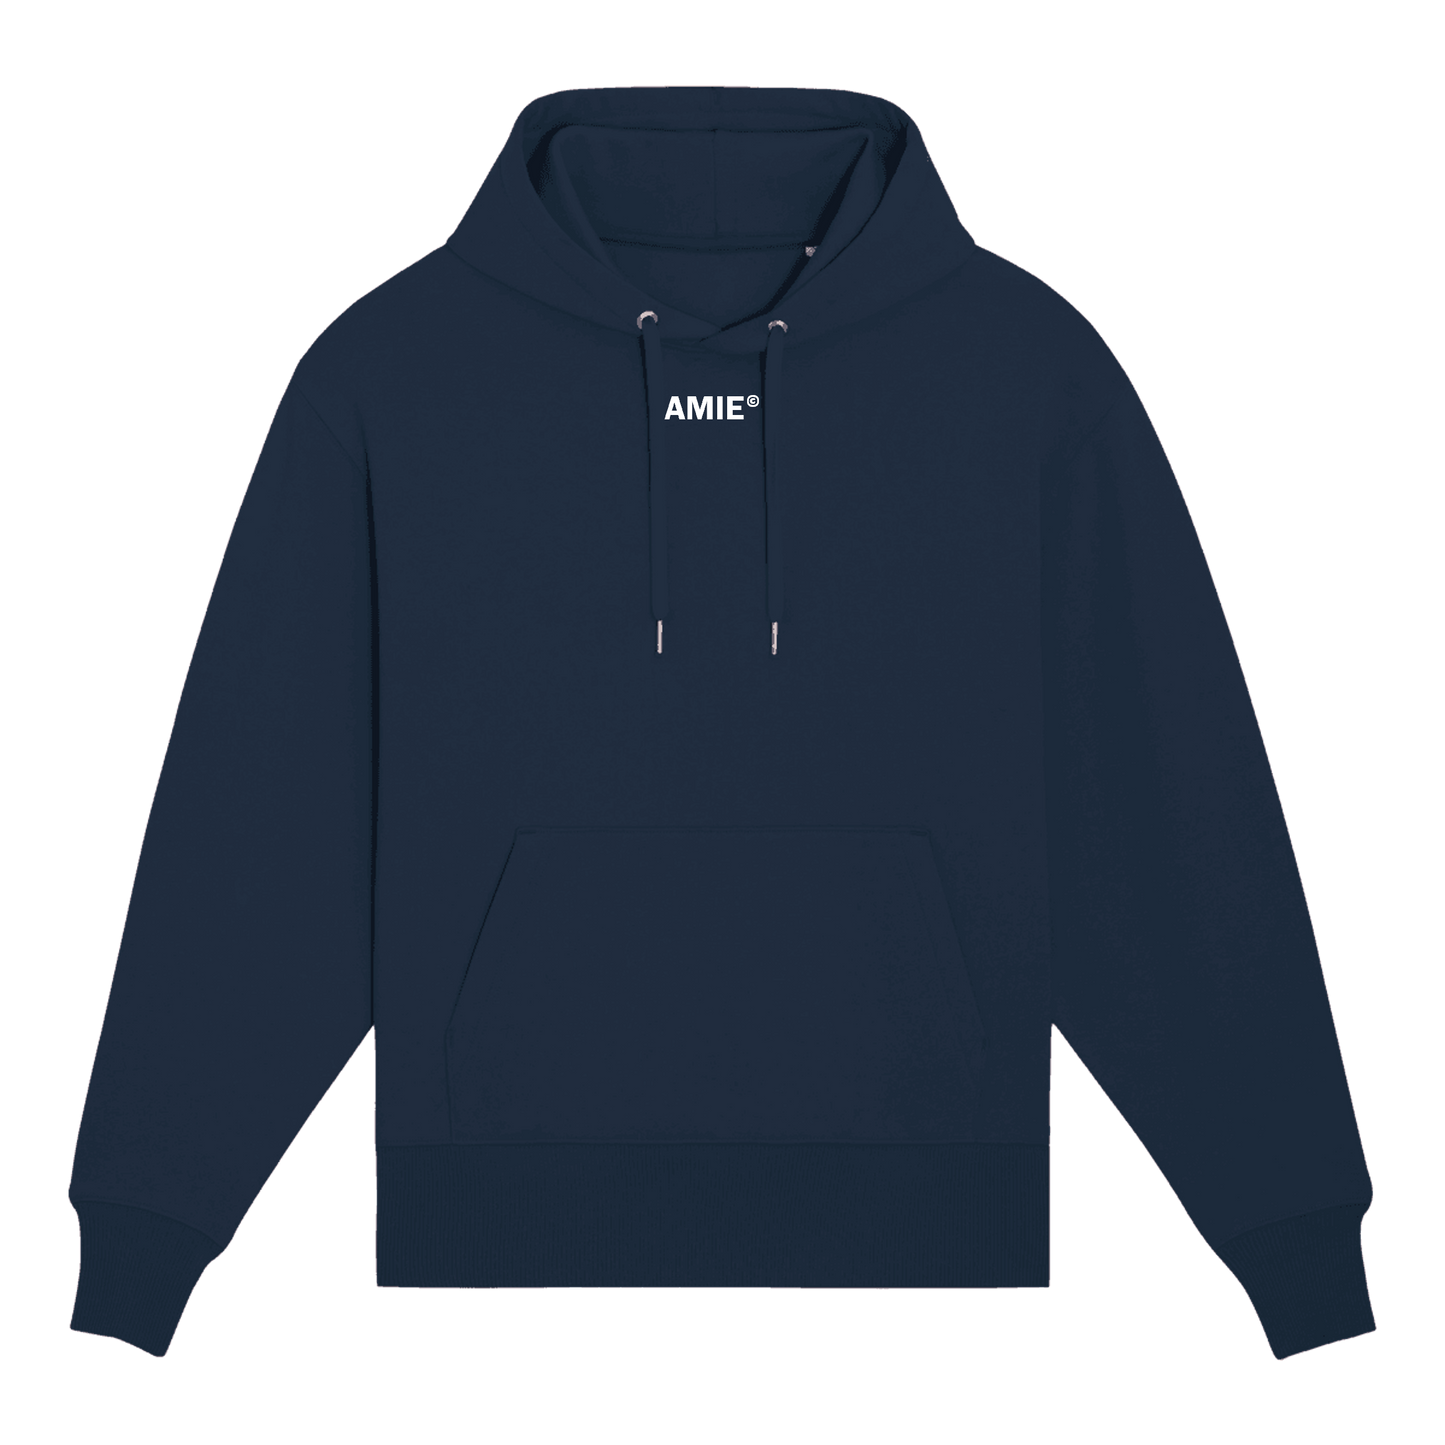 CHICAGO HOODIE